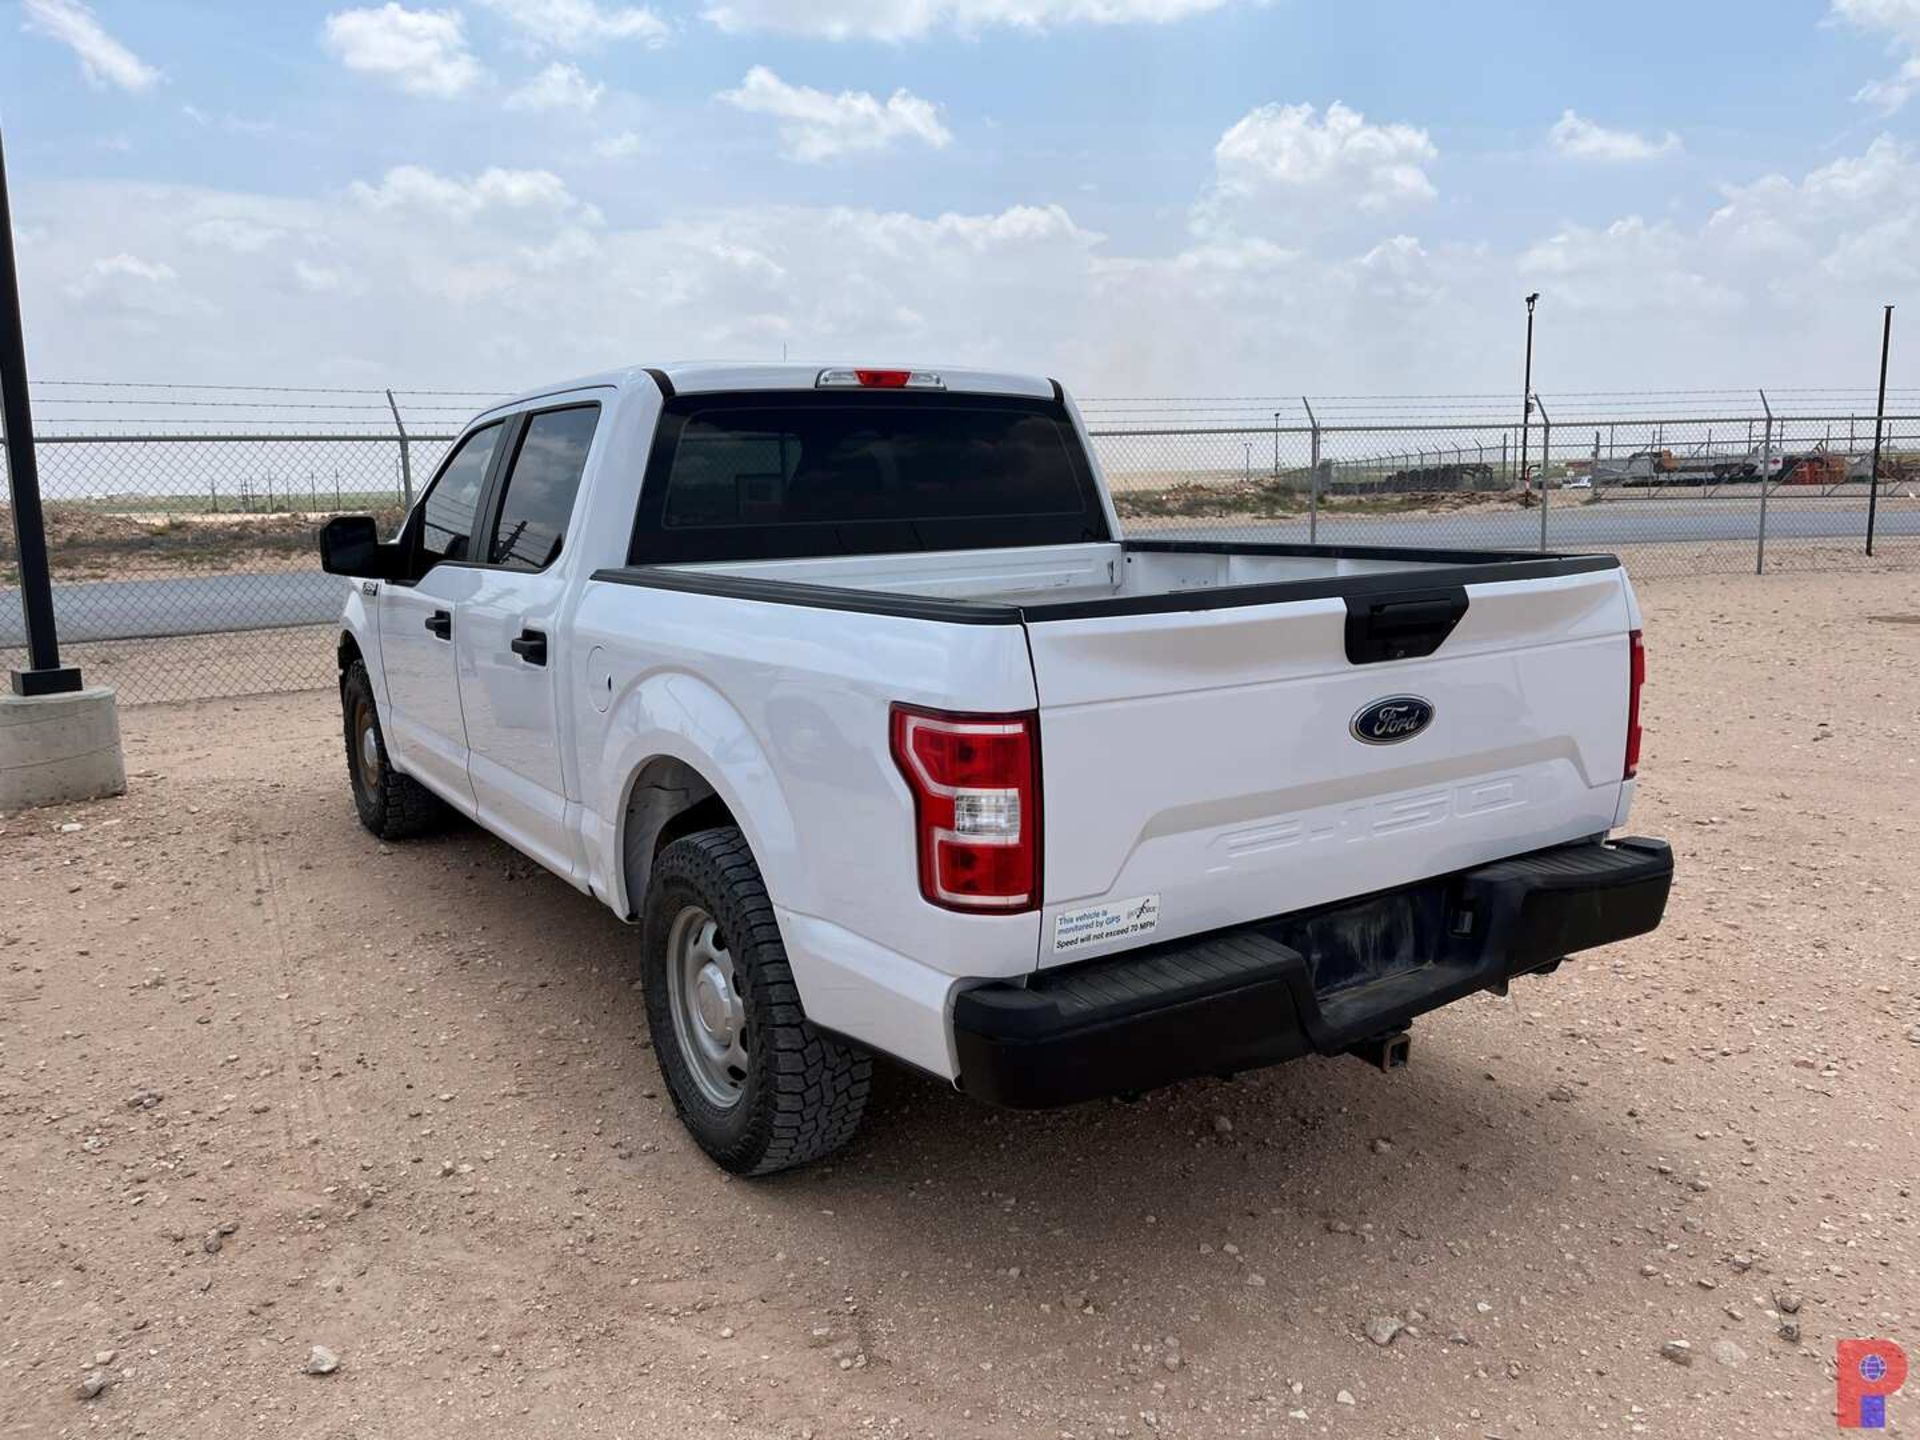 2018 FORD F-150 CREW CAB PICKUP TRUCK - Image 4 of 7